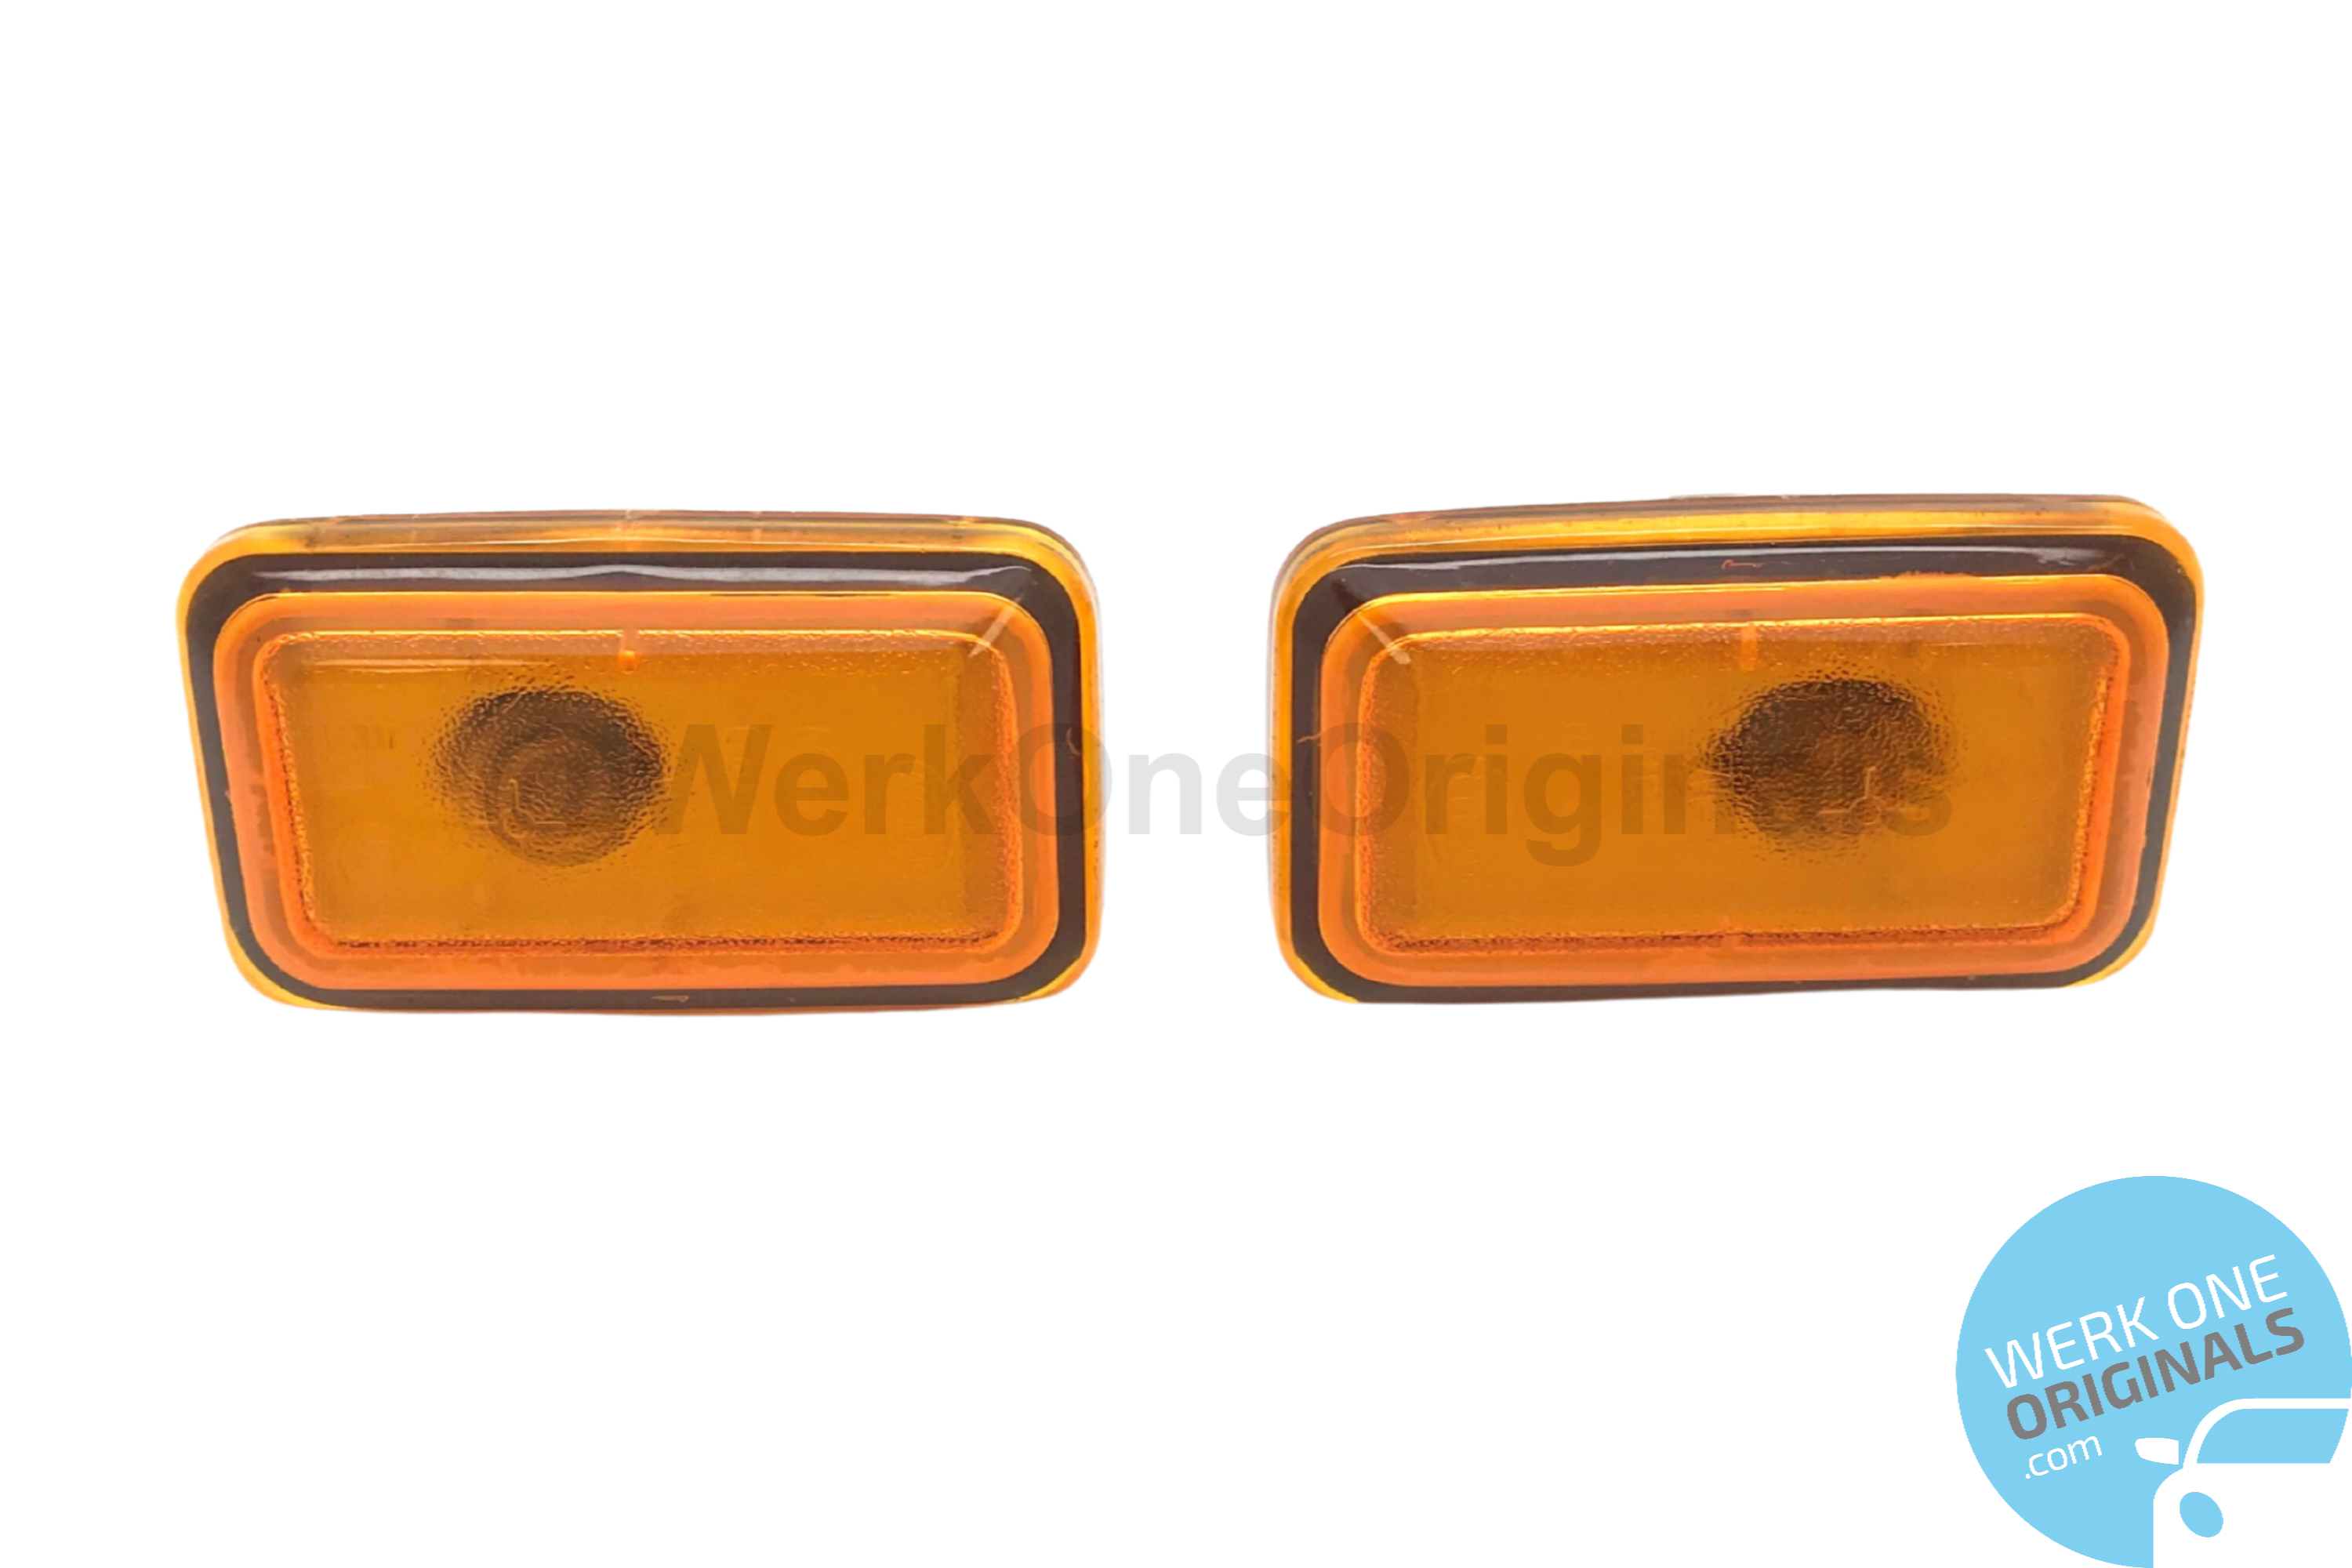 Porsche Genuine Side Repeater Indicator x2 for 911 Type 964 Models